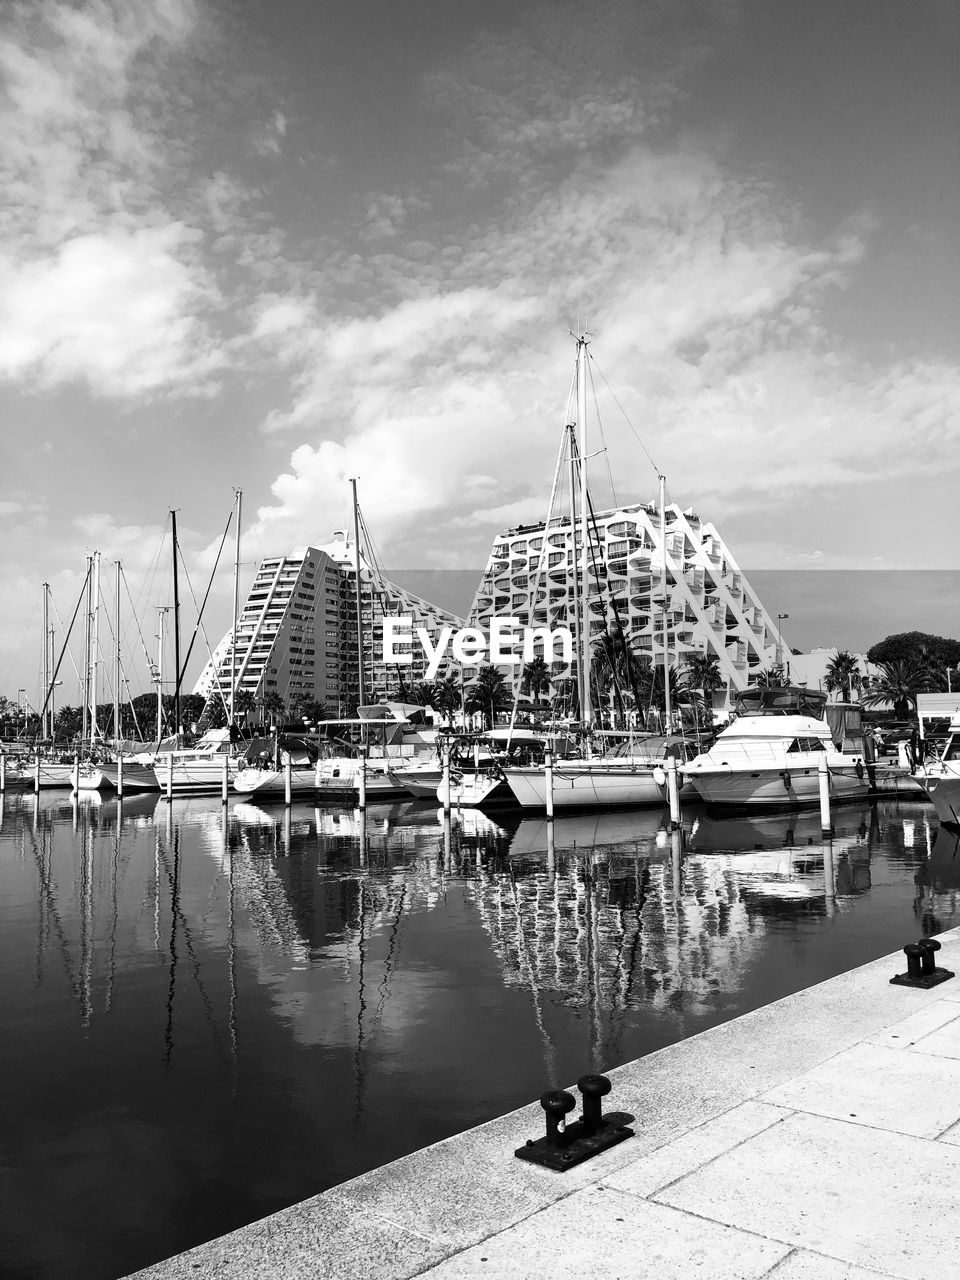 water, sky, black and white, architecture, nautical vessel, harbor, transportation, monochrome, monochrome photography, ship, nature, dock, cloud, built structure, travel destinations, cityscape, city, mode of transportation, pier, vehicle, reflection, building exterior, travel, sailboat, sea, outdoors, day, tourism, marina, moored, no people, building, watercraft